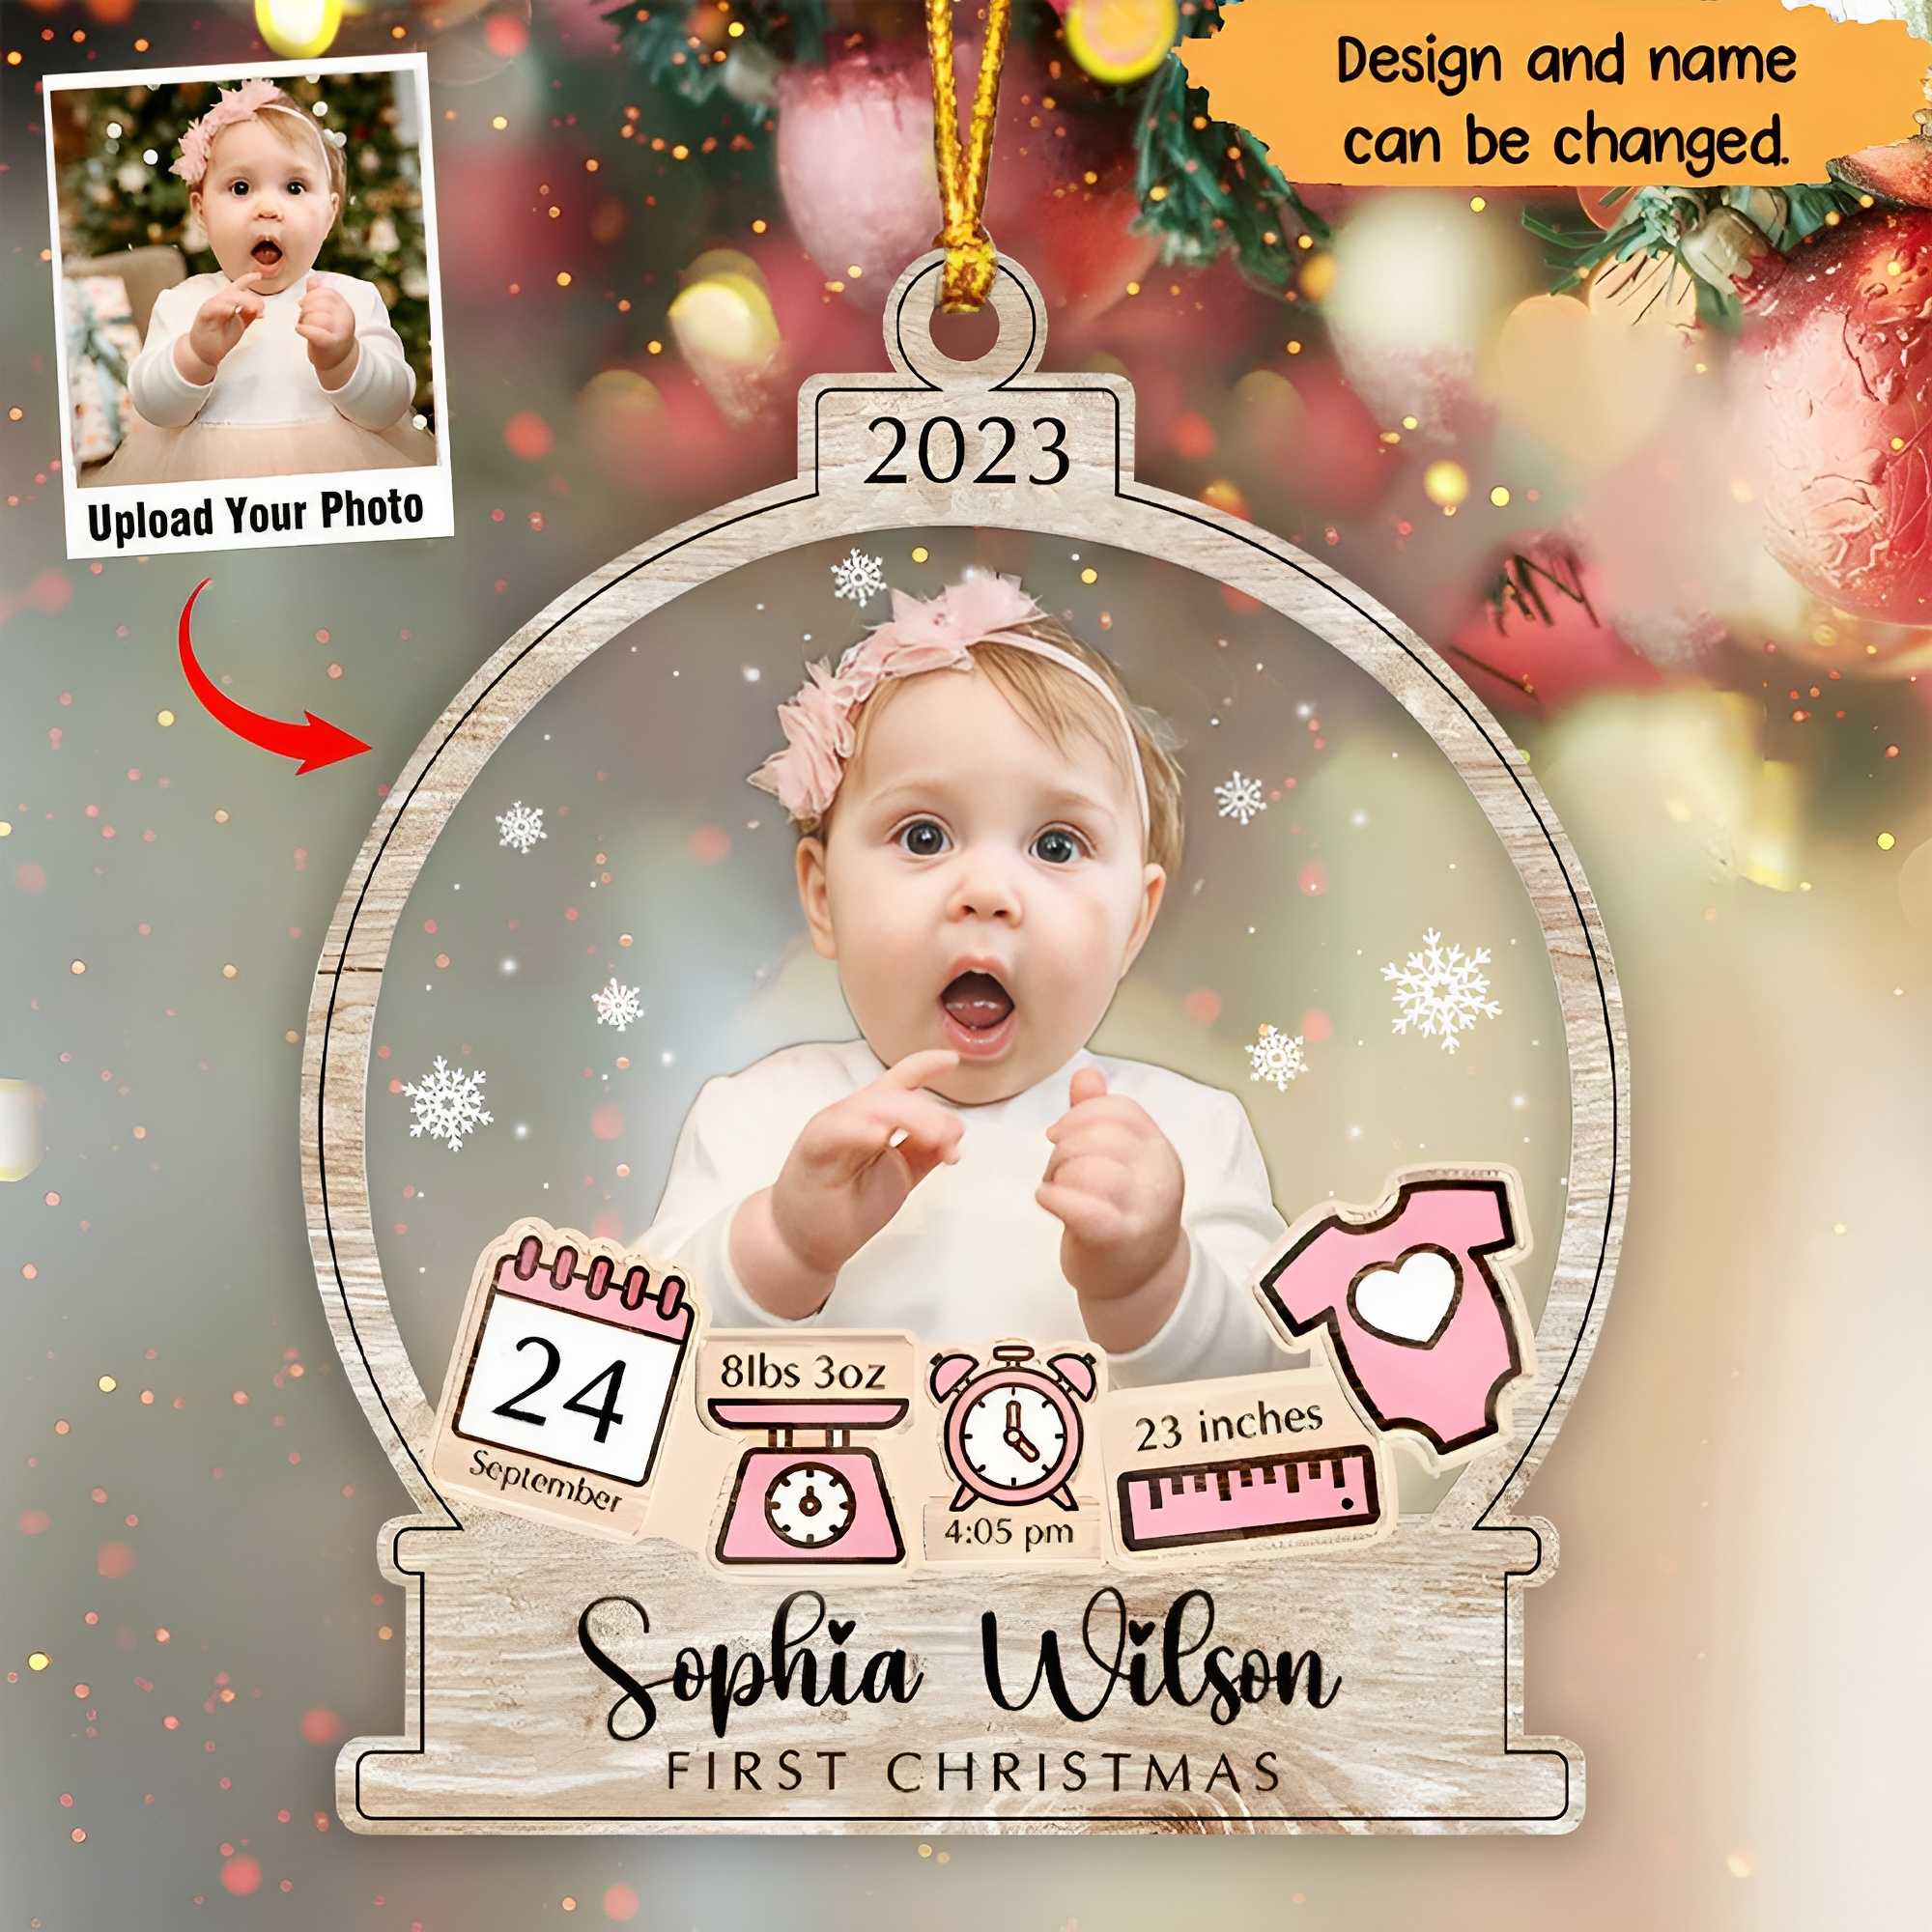 Baby's First Christmas 2023 Personalized Ornament